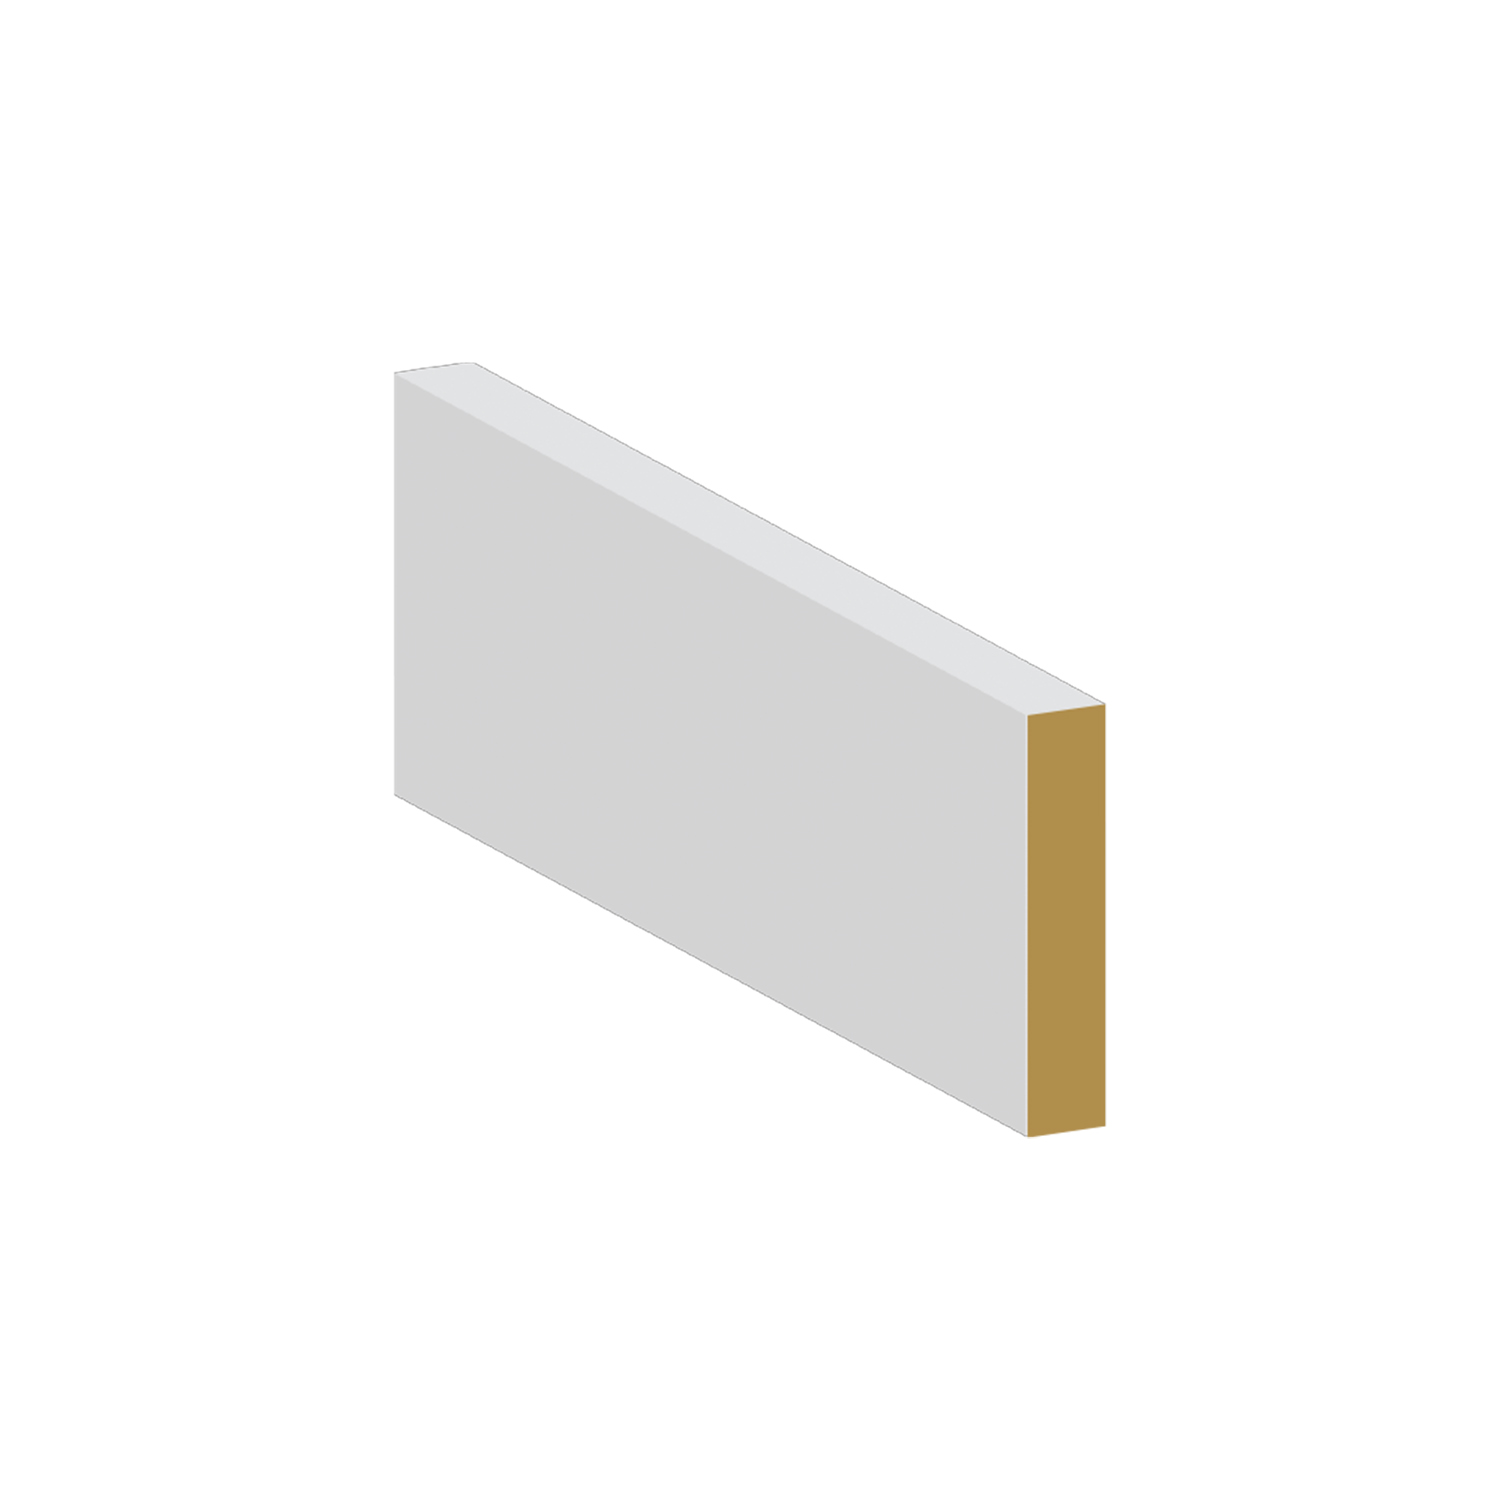 Casing MDF Eased Edge 3 1/2 x 3/4 x 8' - $1.18/LF - SOLD PER PIECE - EACH PIECE IS 8' - $9.50 EACH